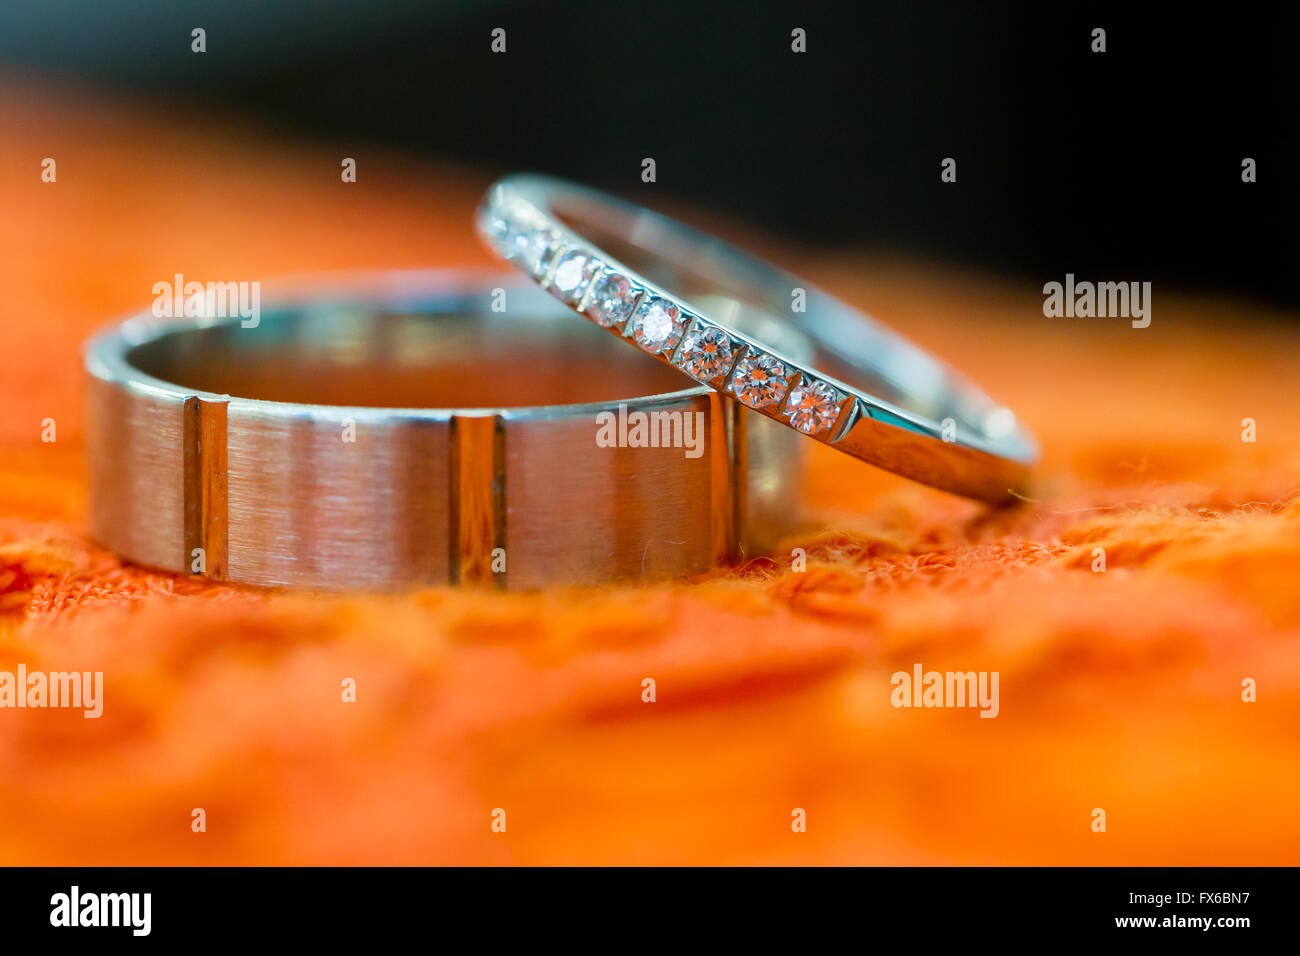 Bride and groom wedding rings photographed before the ceremony on an orange tablecloth. Stock Photo